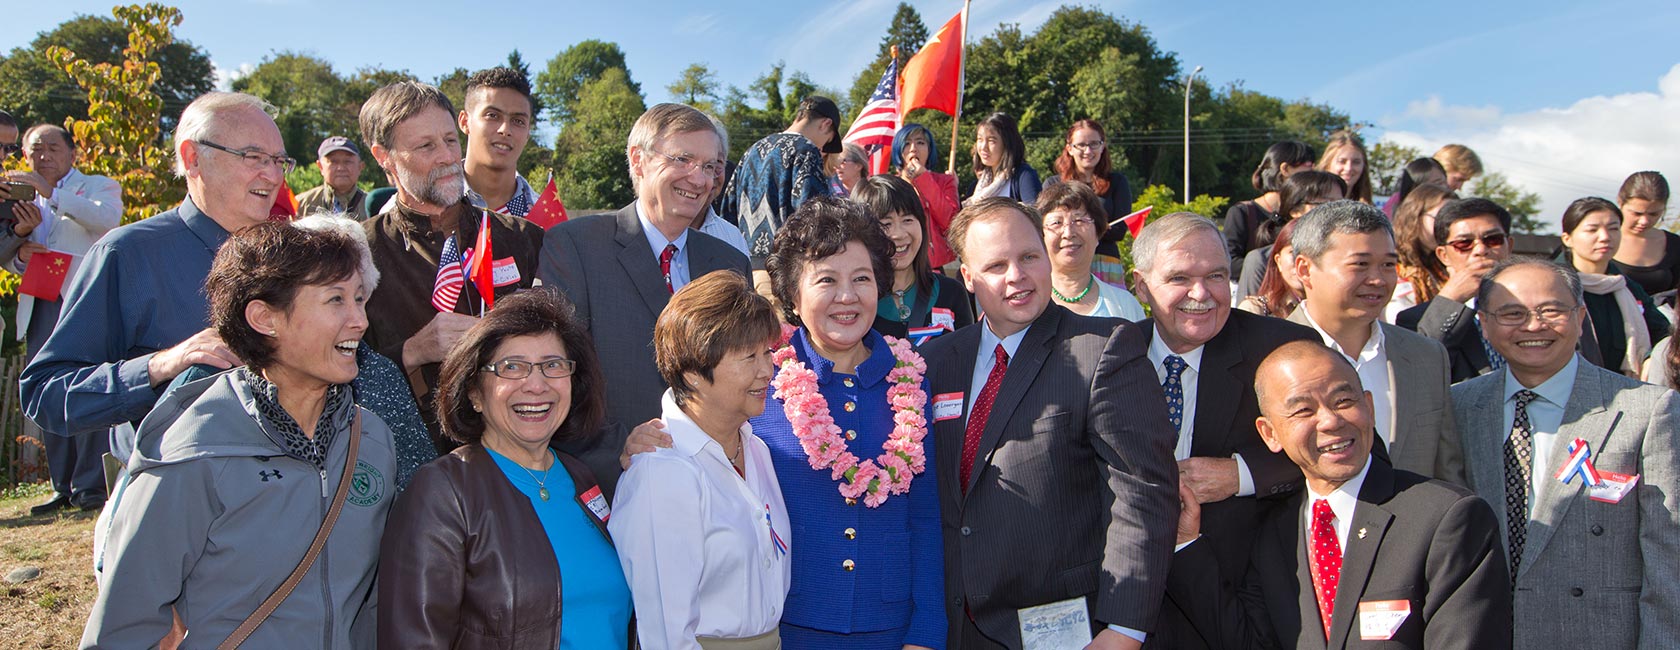 PLU Professor of Music Greg Youtz (back row, second from left) joins elected officials and community leaders in welcoming the Honorable Qiu Yuan Ping, Minister of Overseas Chinese Commission (front row, fourth from left), to Tacoma's Chinese Reconciliation Park. (Photo by John Froschauer/PLU)